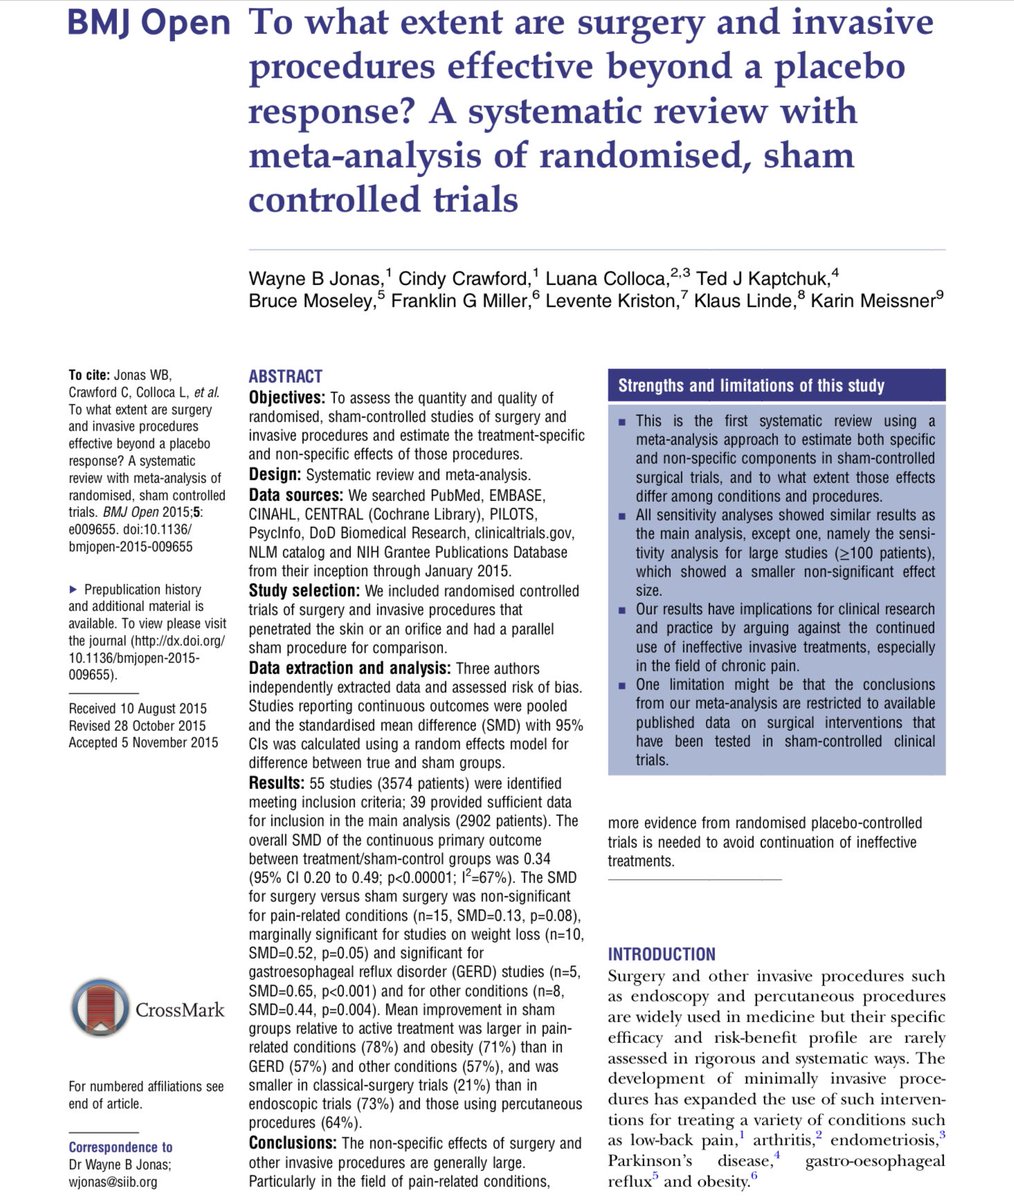 To what extent are surgery and invasive procedures effective beyond a placebo response? A systematic review with meta-analysis of randomised, sham controlled trials ncbi.nlm.nih.gov/pmc/articles/P… “The non-specific effects of surgery and other invasive procedures are generally large”